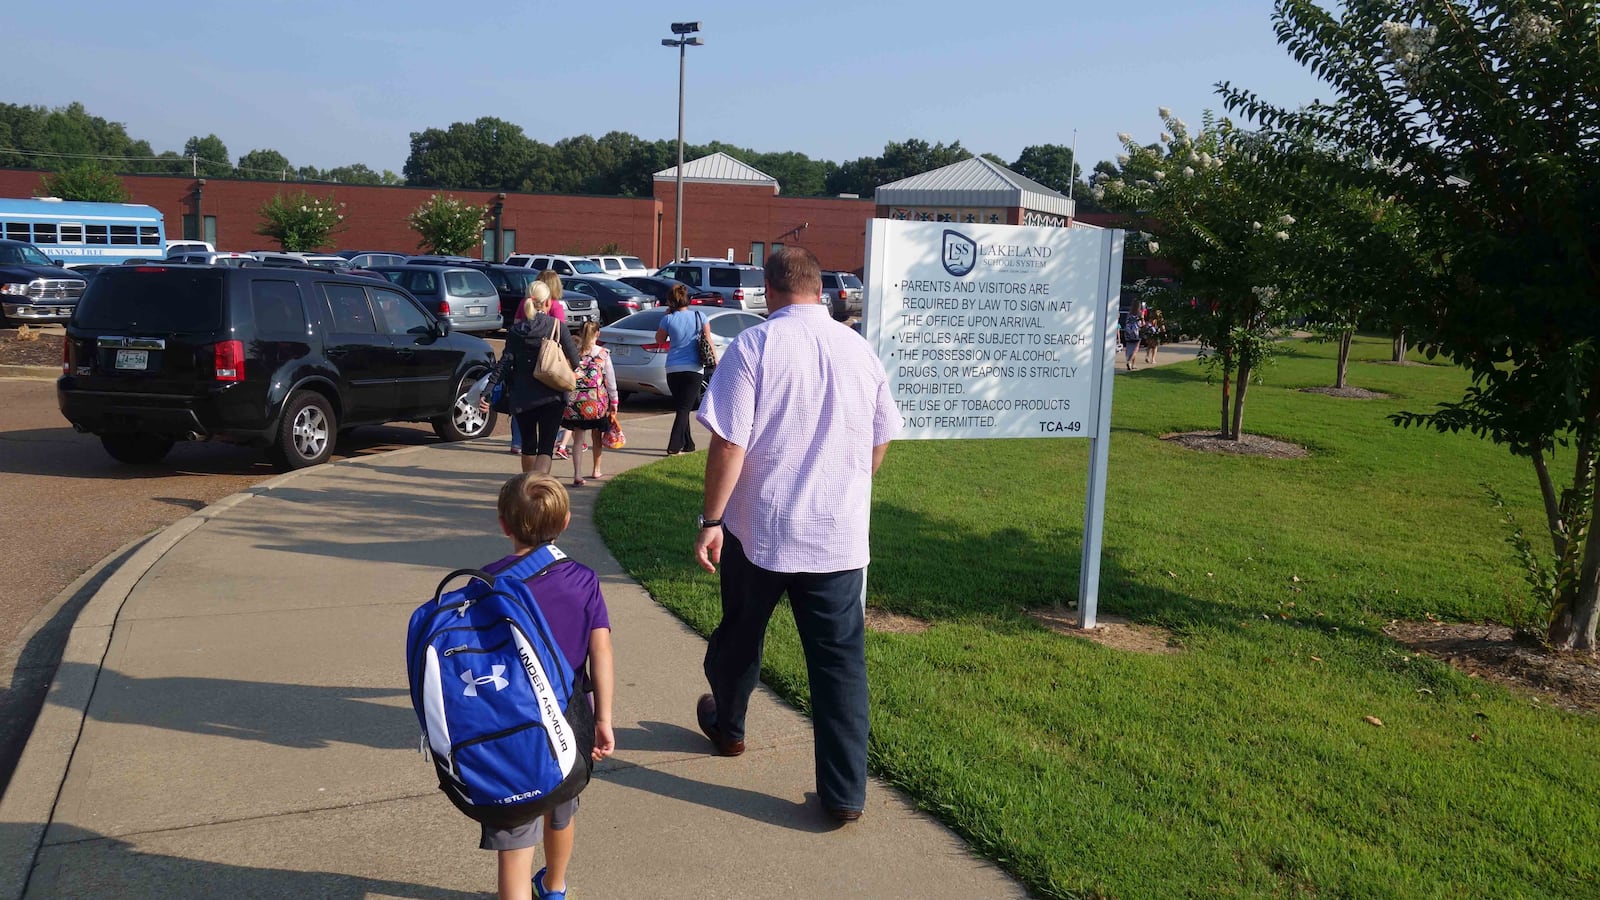 Hauling a backpack almost as big as himself, a student walks into Lakeland Elementary School on the first day of the 2014-15 school year. A resolution filed in the Tennessee General Assembly recommends that schools promote ways to avoid backpack-related injuries.